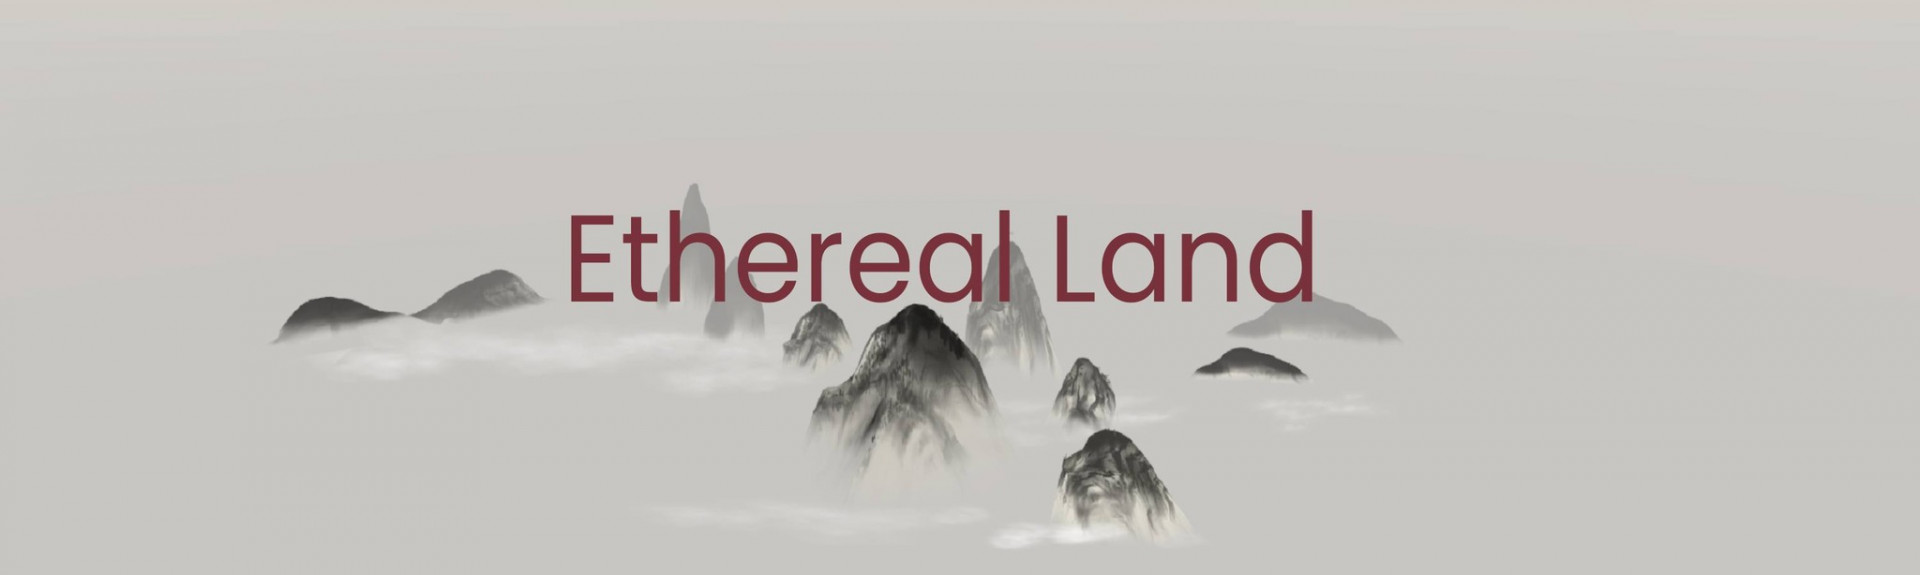 Ethereal Land